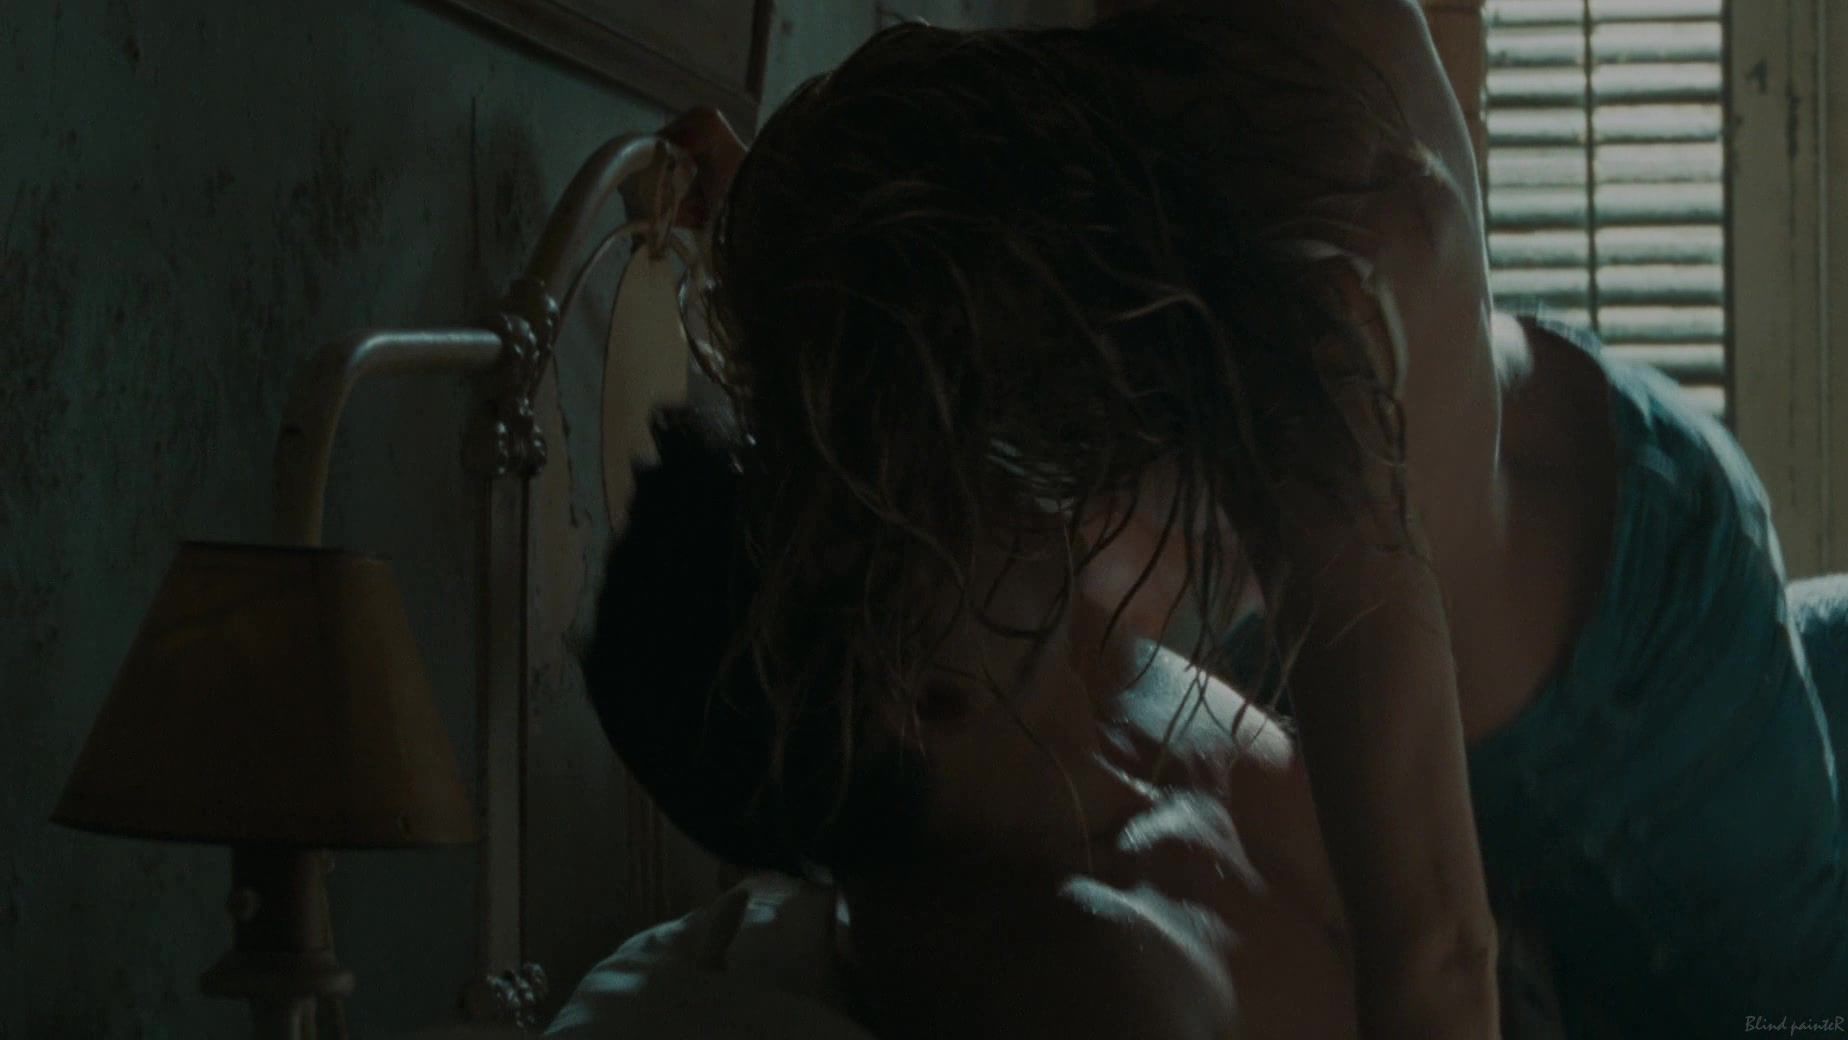 Gay Fetish Amber Heard nude - The Rum Diary (2011) Reality Porn